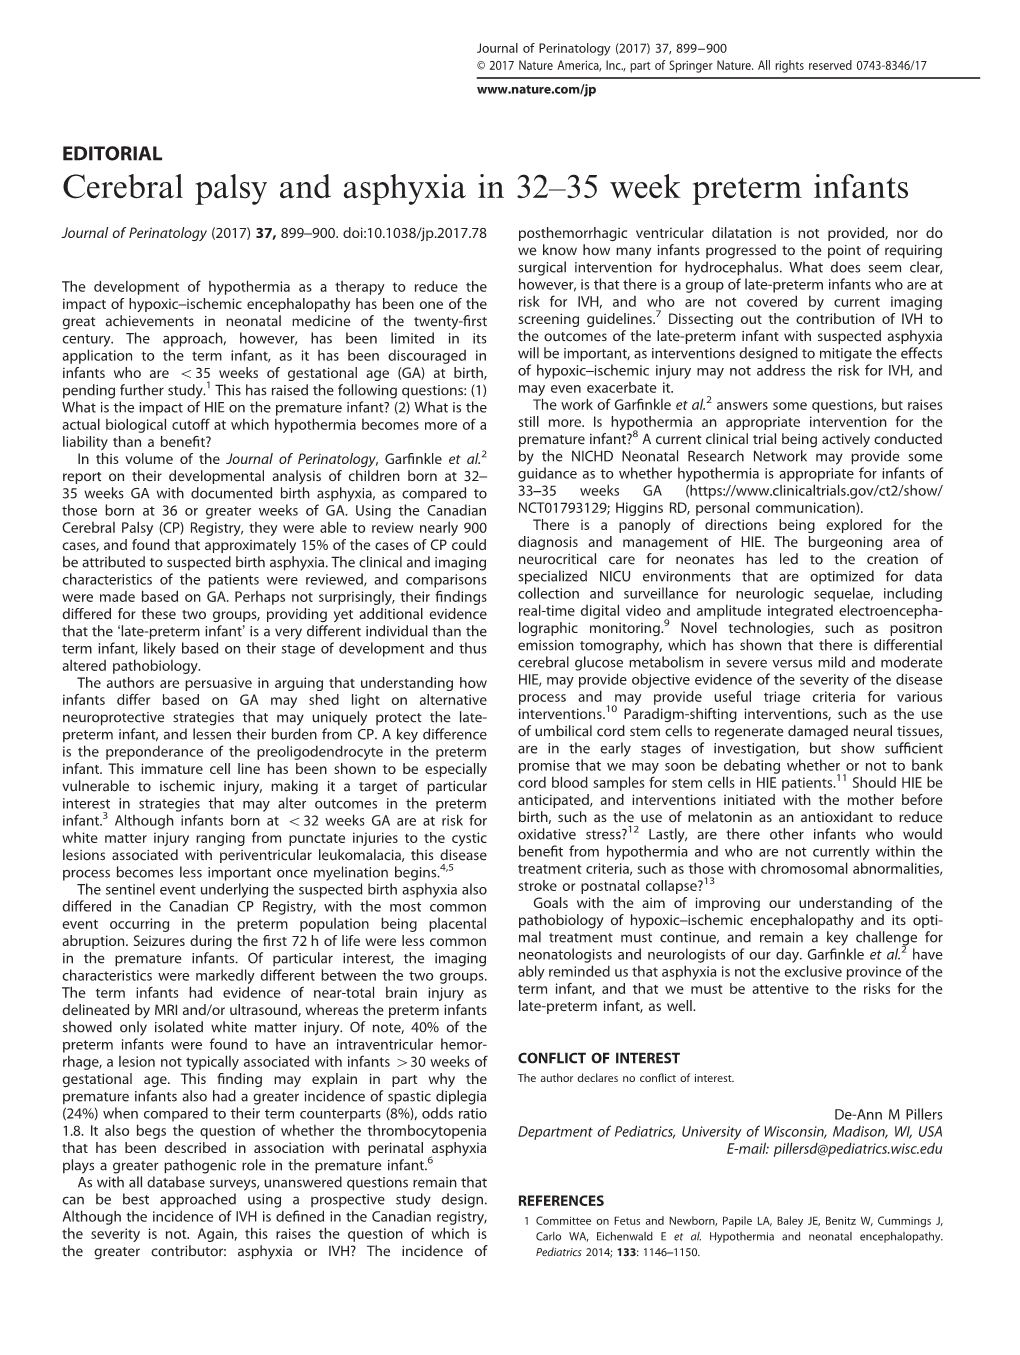 Cerebral Palsy and Asphyxia in 32–35 Week Preterm Infants